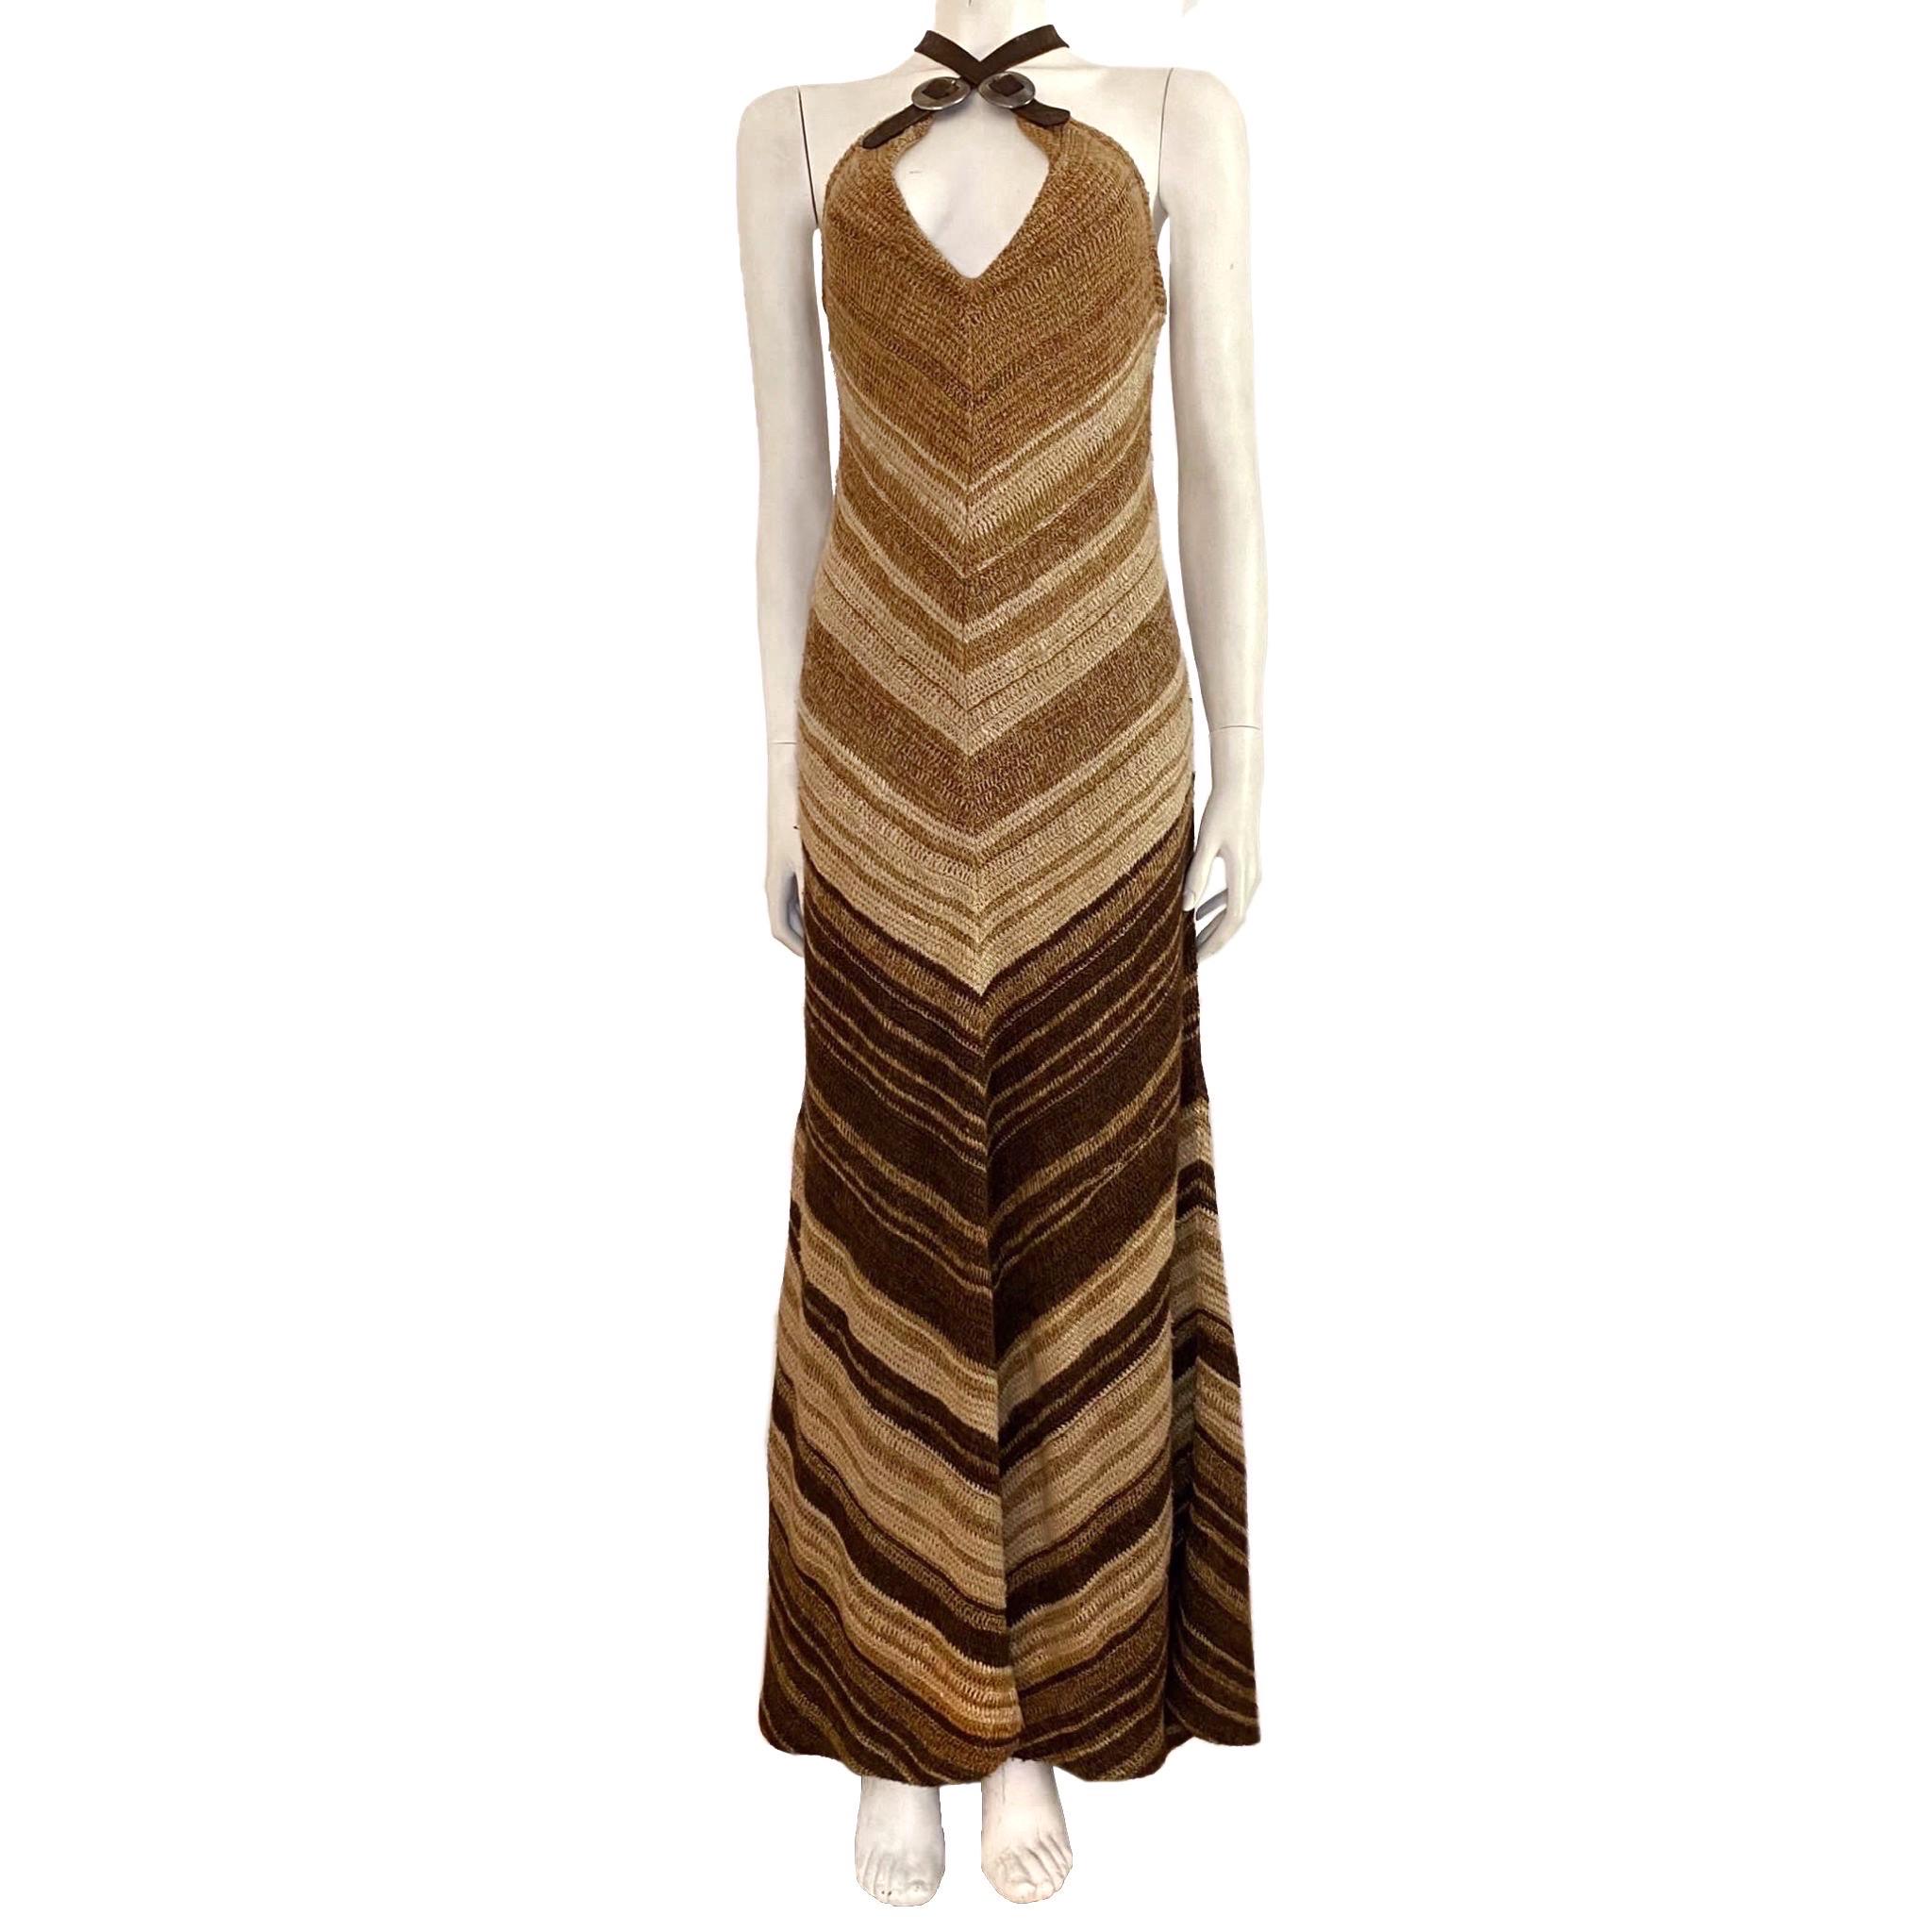 Ralph Lauren handknit zigzag brown maxi dress with carved leather buckled straps, which can be styled at will. Early 2010s.

Size label M

- front length: 146 cm/ 57,4 inch
- back length: 153 cm/ 60,2 inch
- pit to pit: 45 cm/ 17,7 inch
- waist: 78